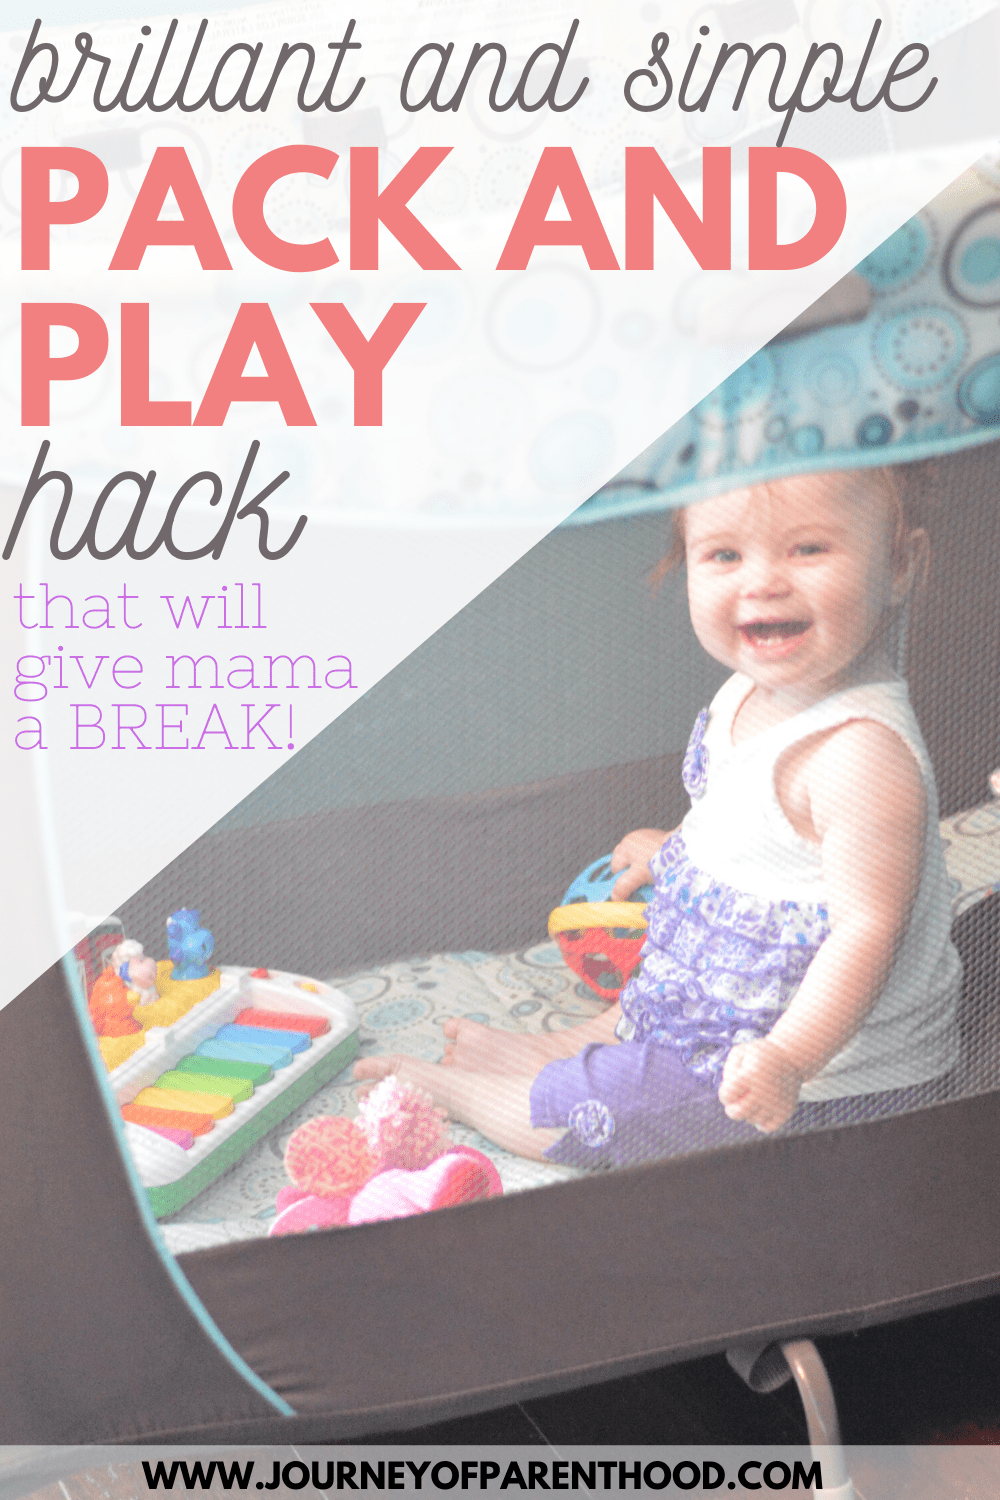 what is a pack and play used for? simple pack and play hack that will give mama a break!